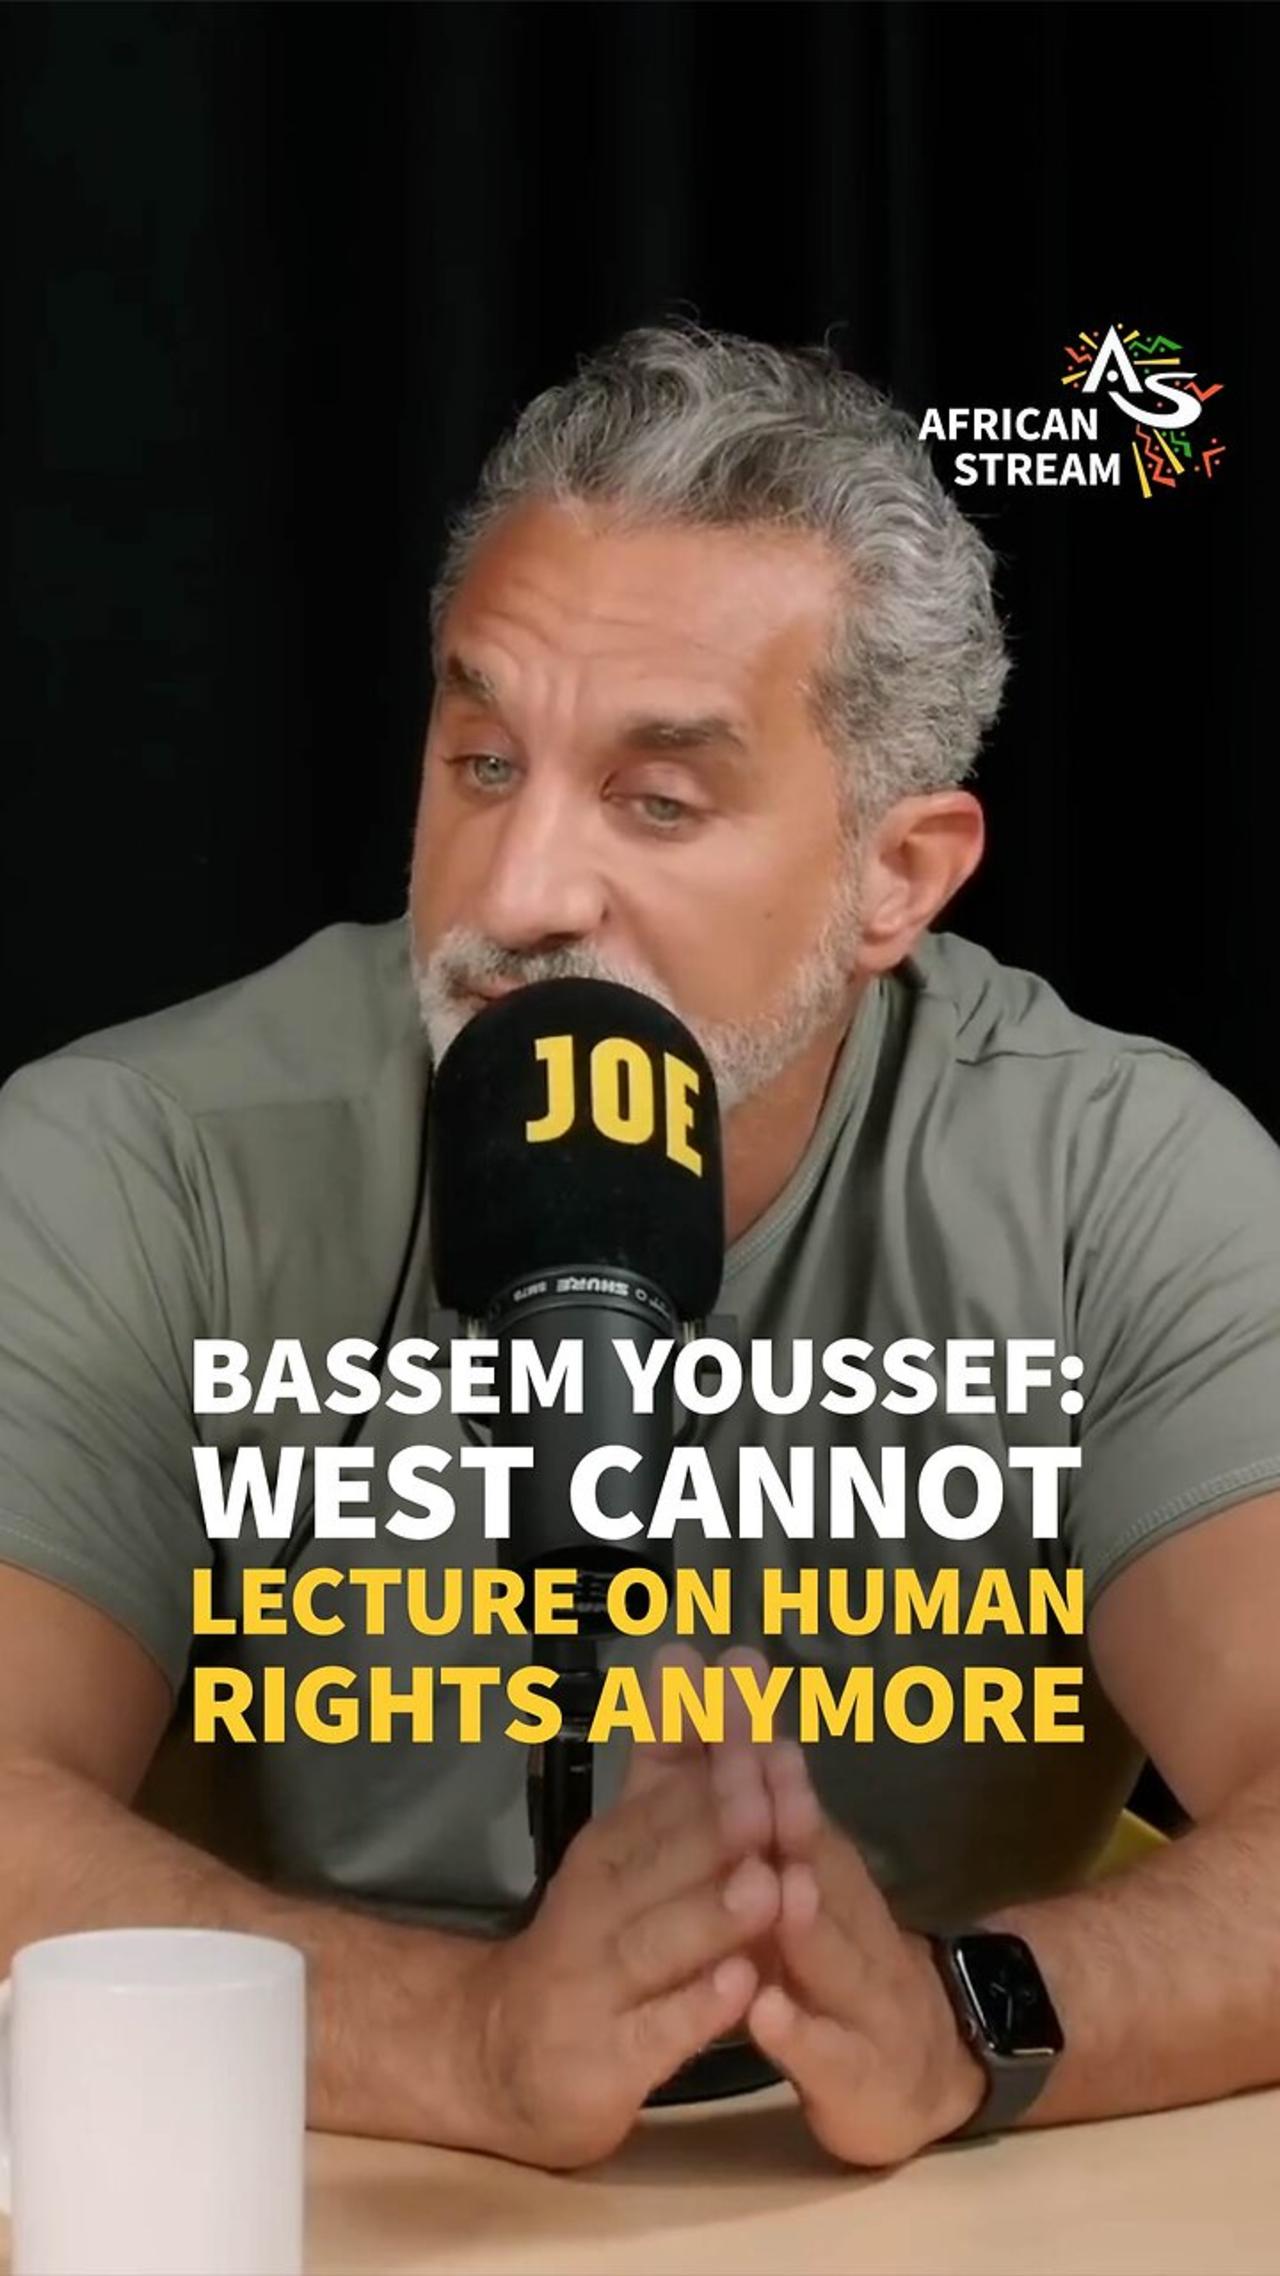 BASSEM YOUSSEF: WEST CANNOT LECTURE ON HUMAN RIGHTS ANYMORE